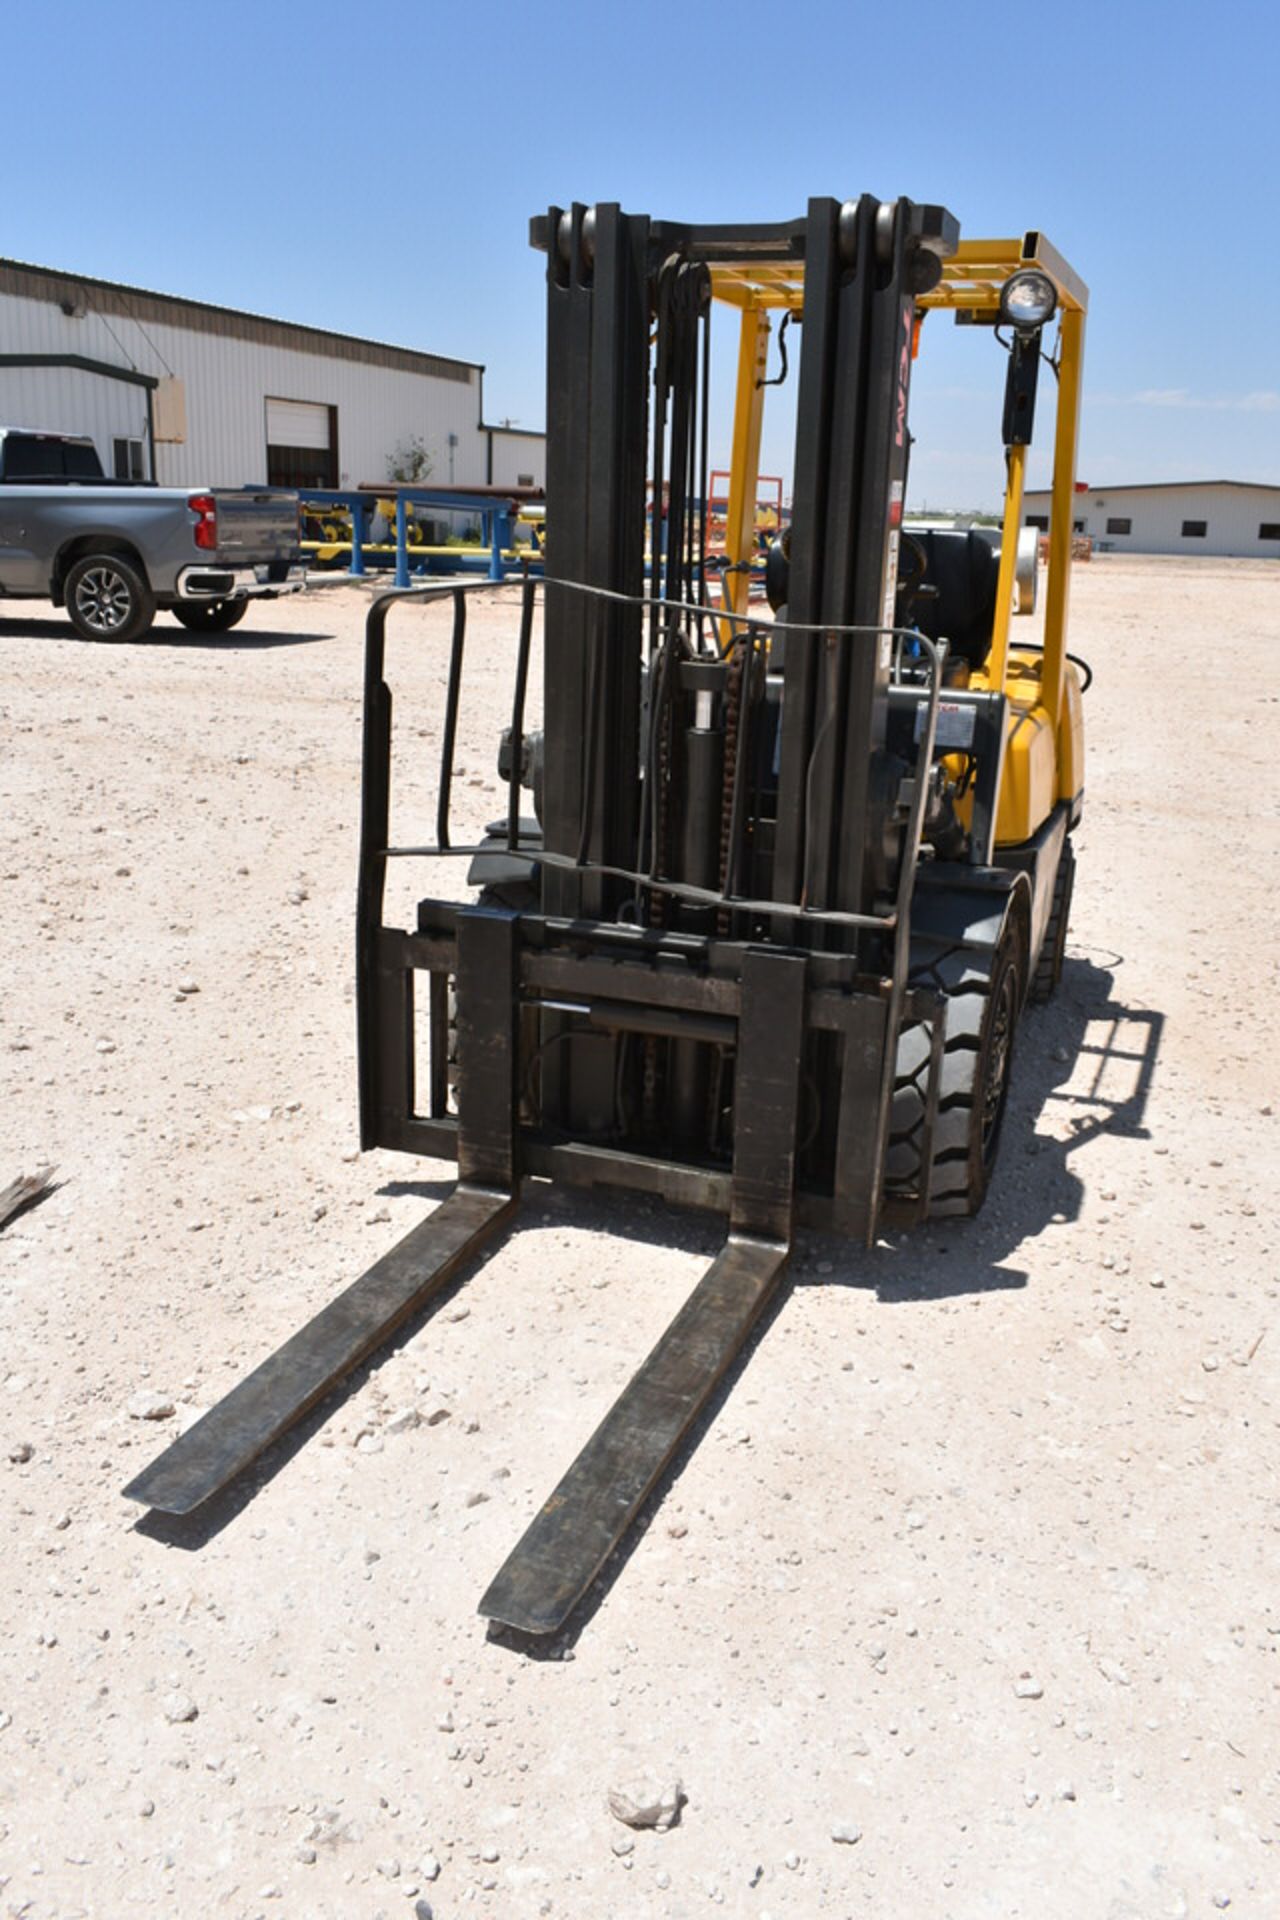 TCM FORKLIFT, LIFT CAP: 5,600 LBS, LIFT HEIGHT: 171.5", MDL:FG30N5T, 7,727 HOURS - Image 2 of 10